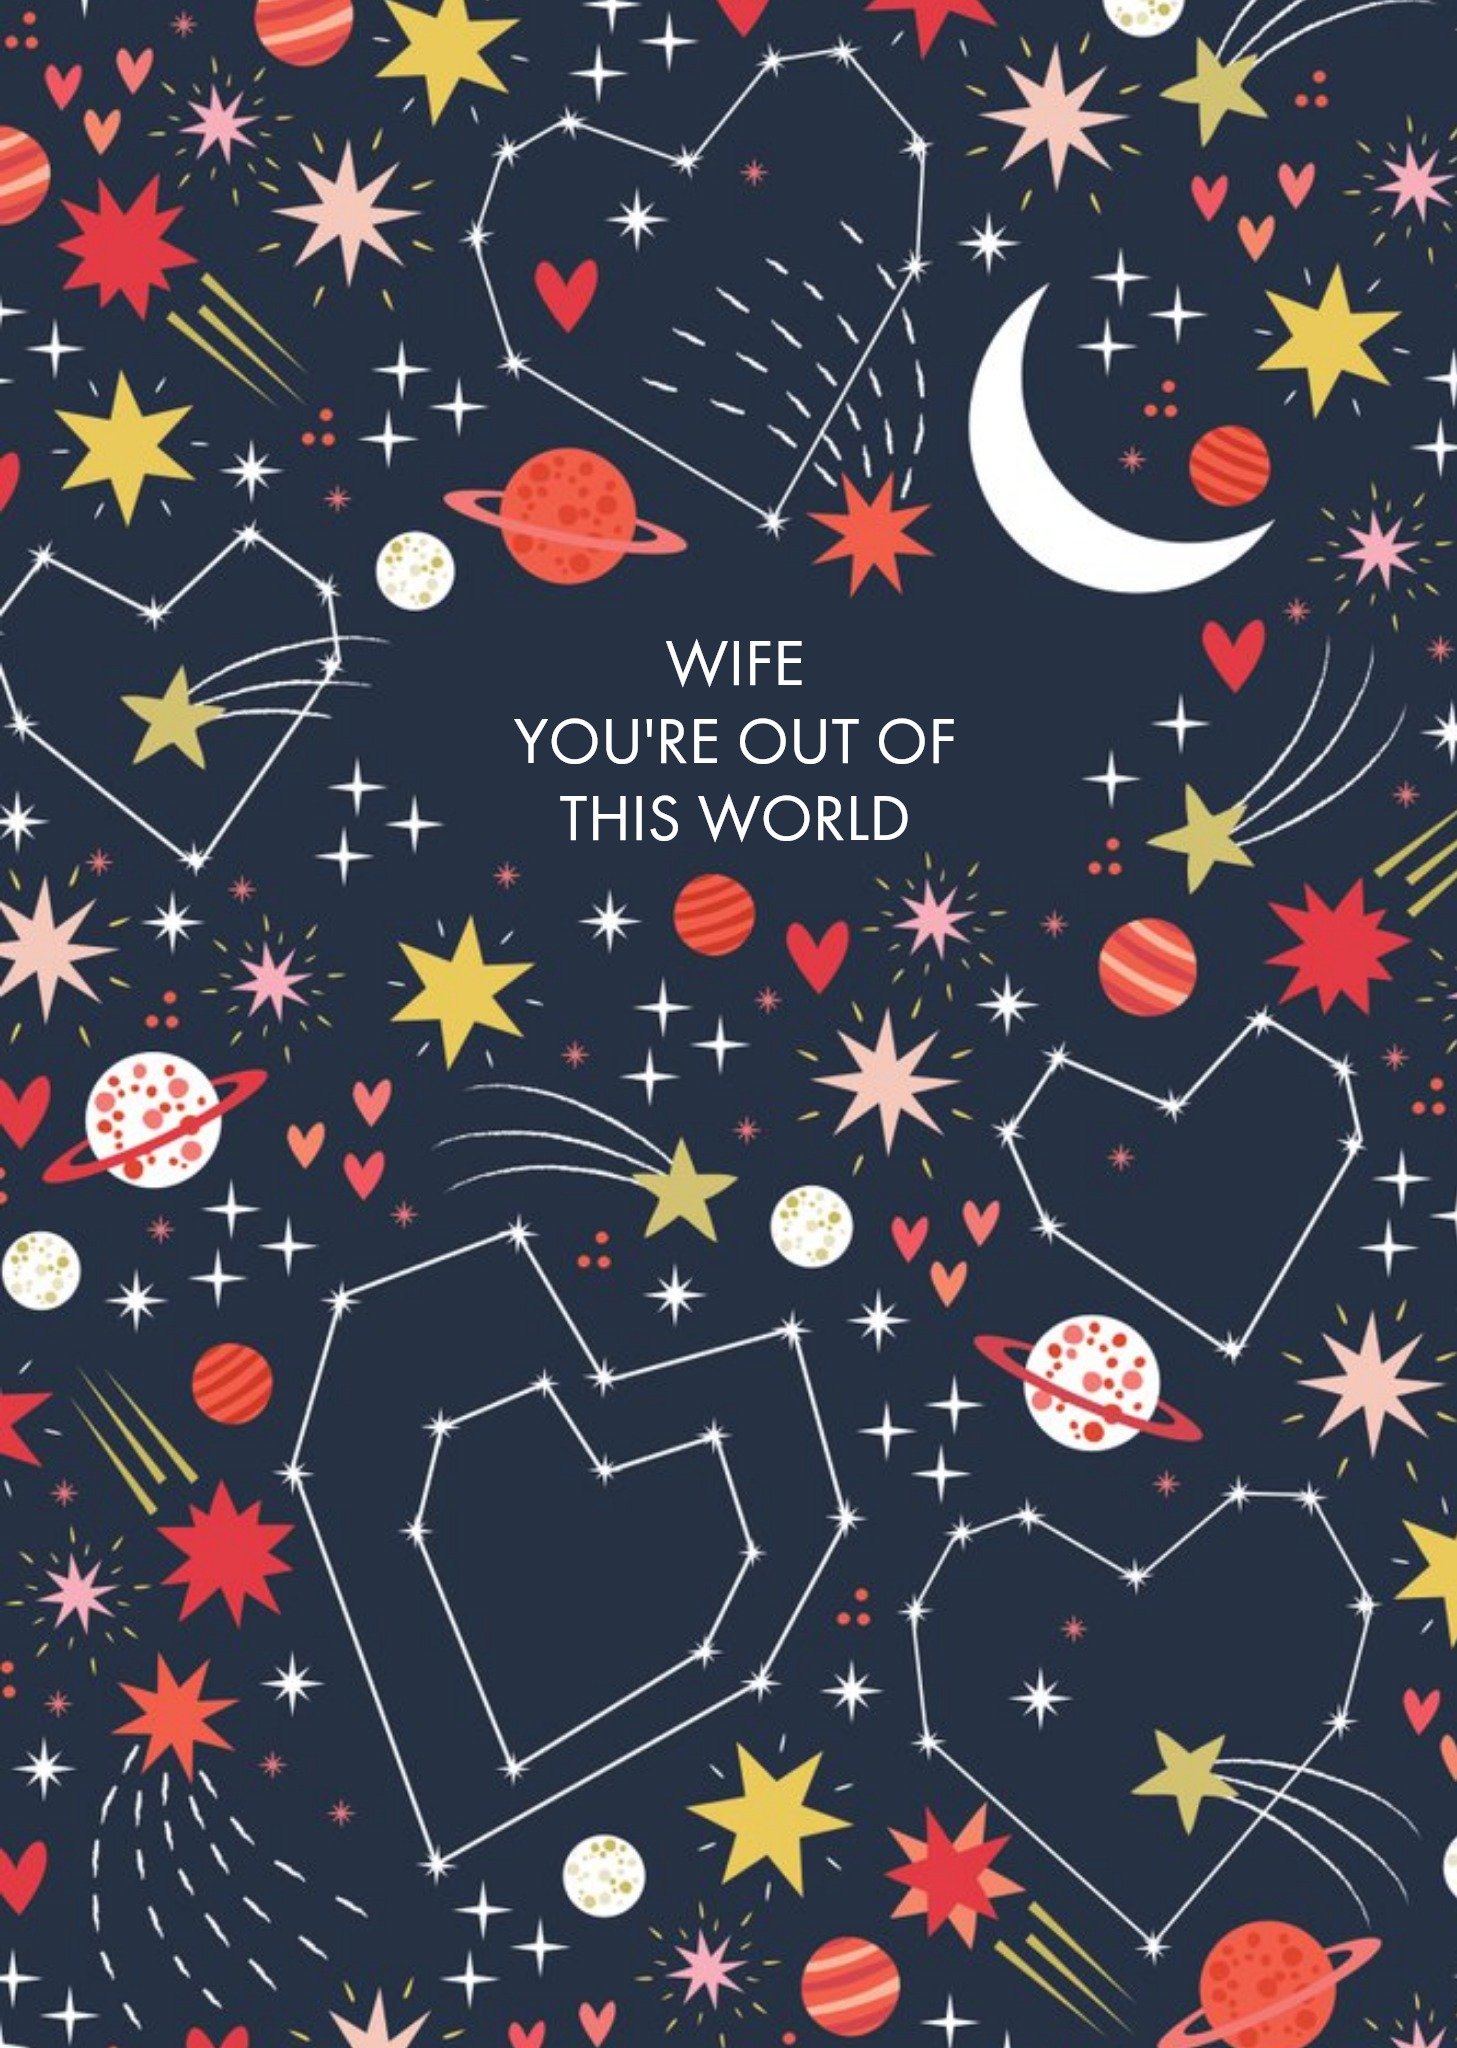 Moonpig Colourful Cosmos You're Out Of This World Wife Valentine's Card, Large